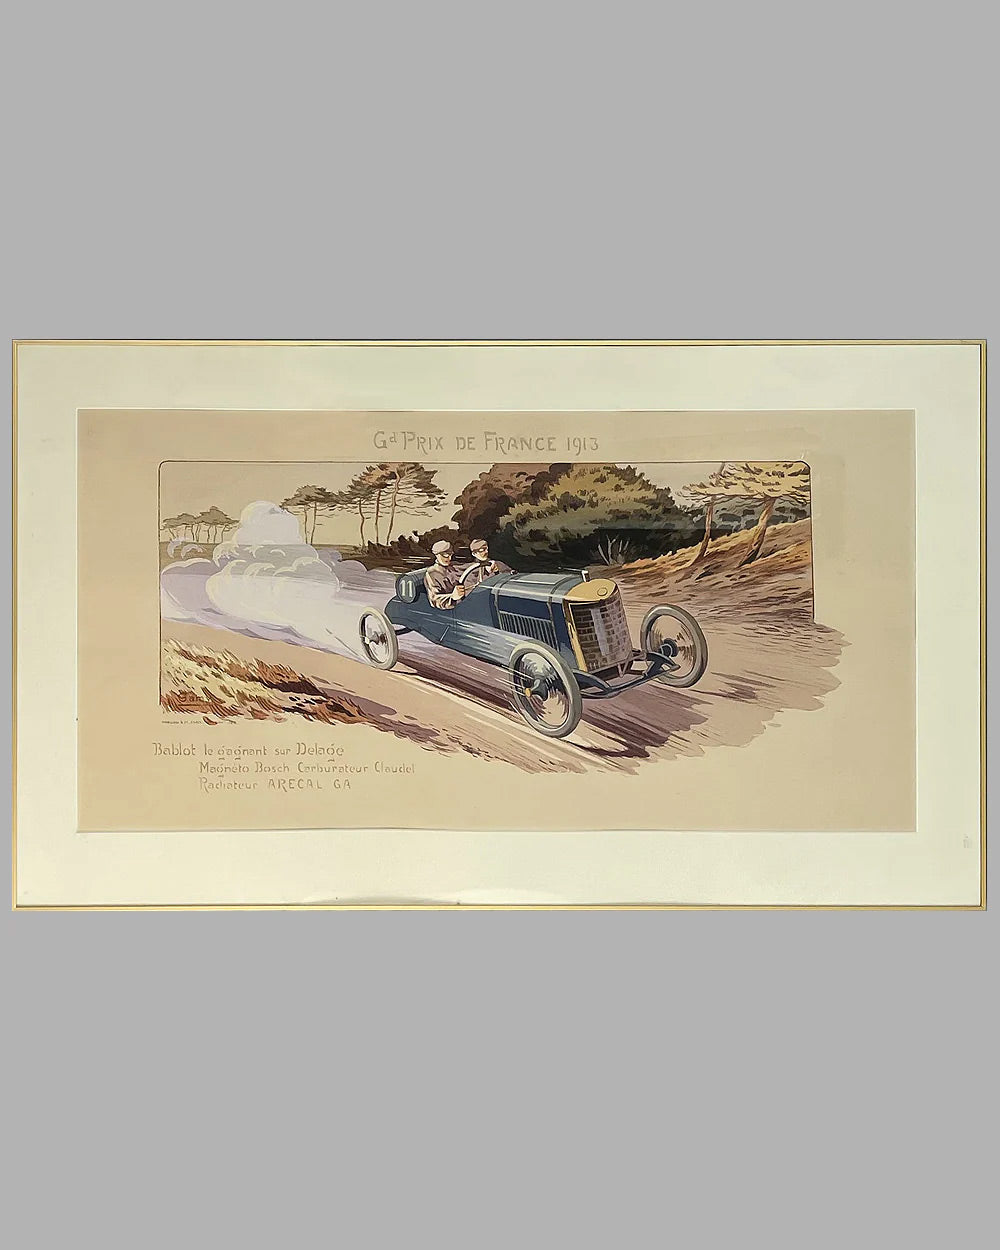 Grand Prix de France 1913, hand colored lithograph by Gamy (Marguerite Montaut)